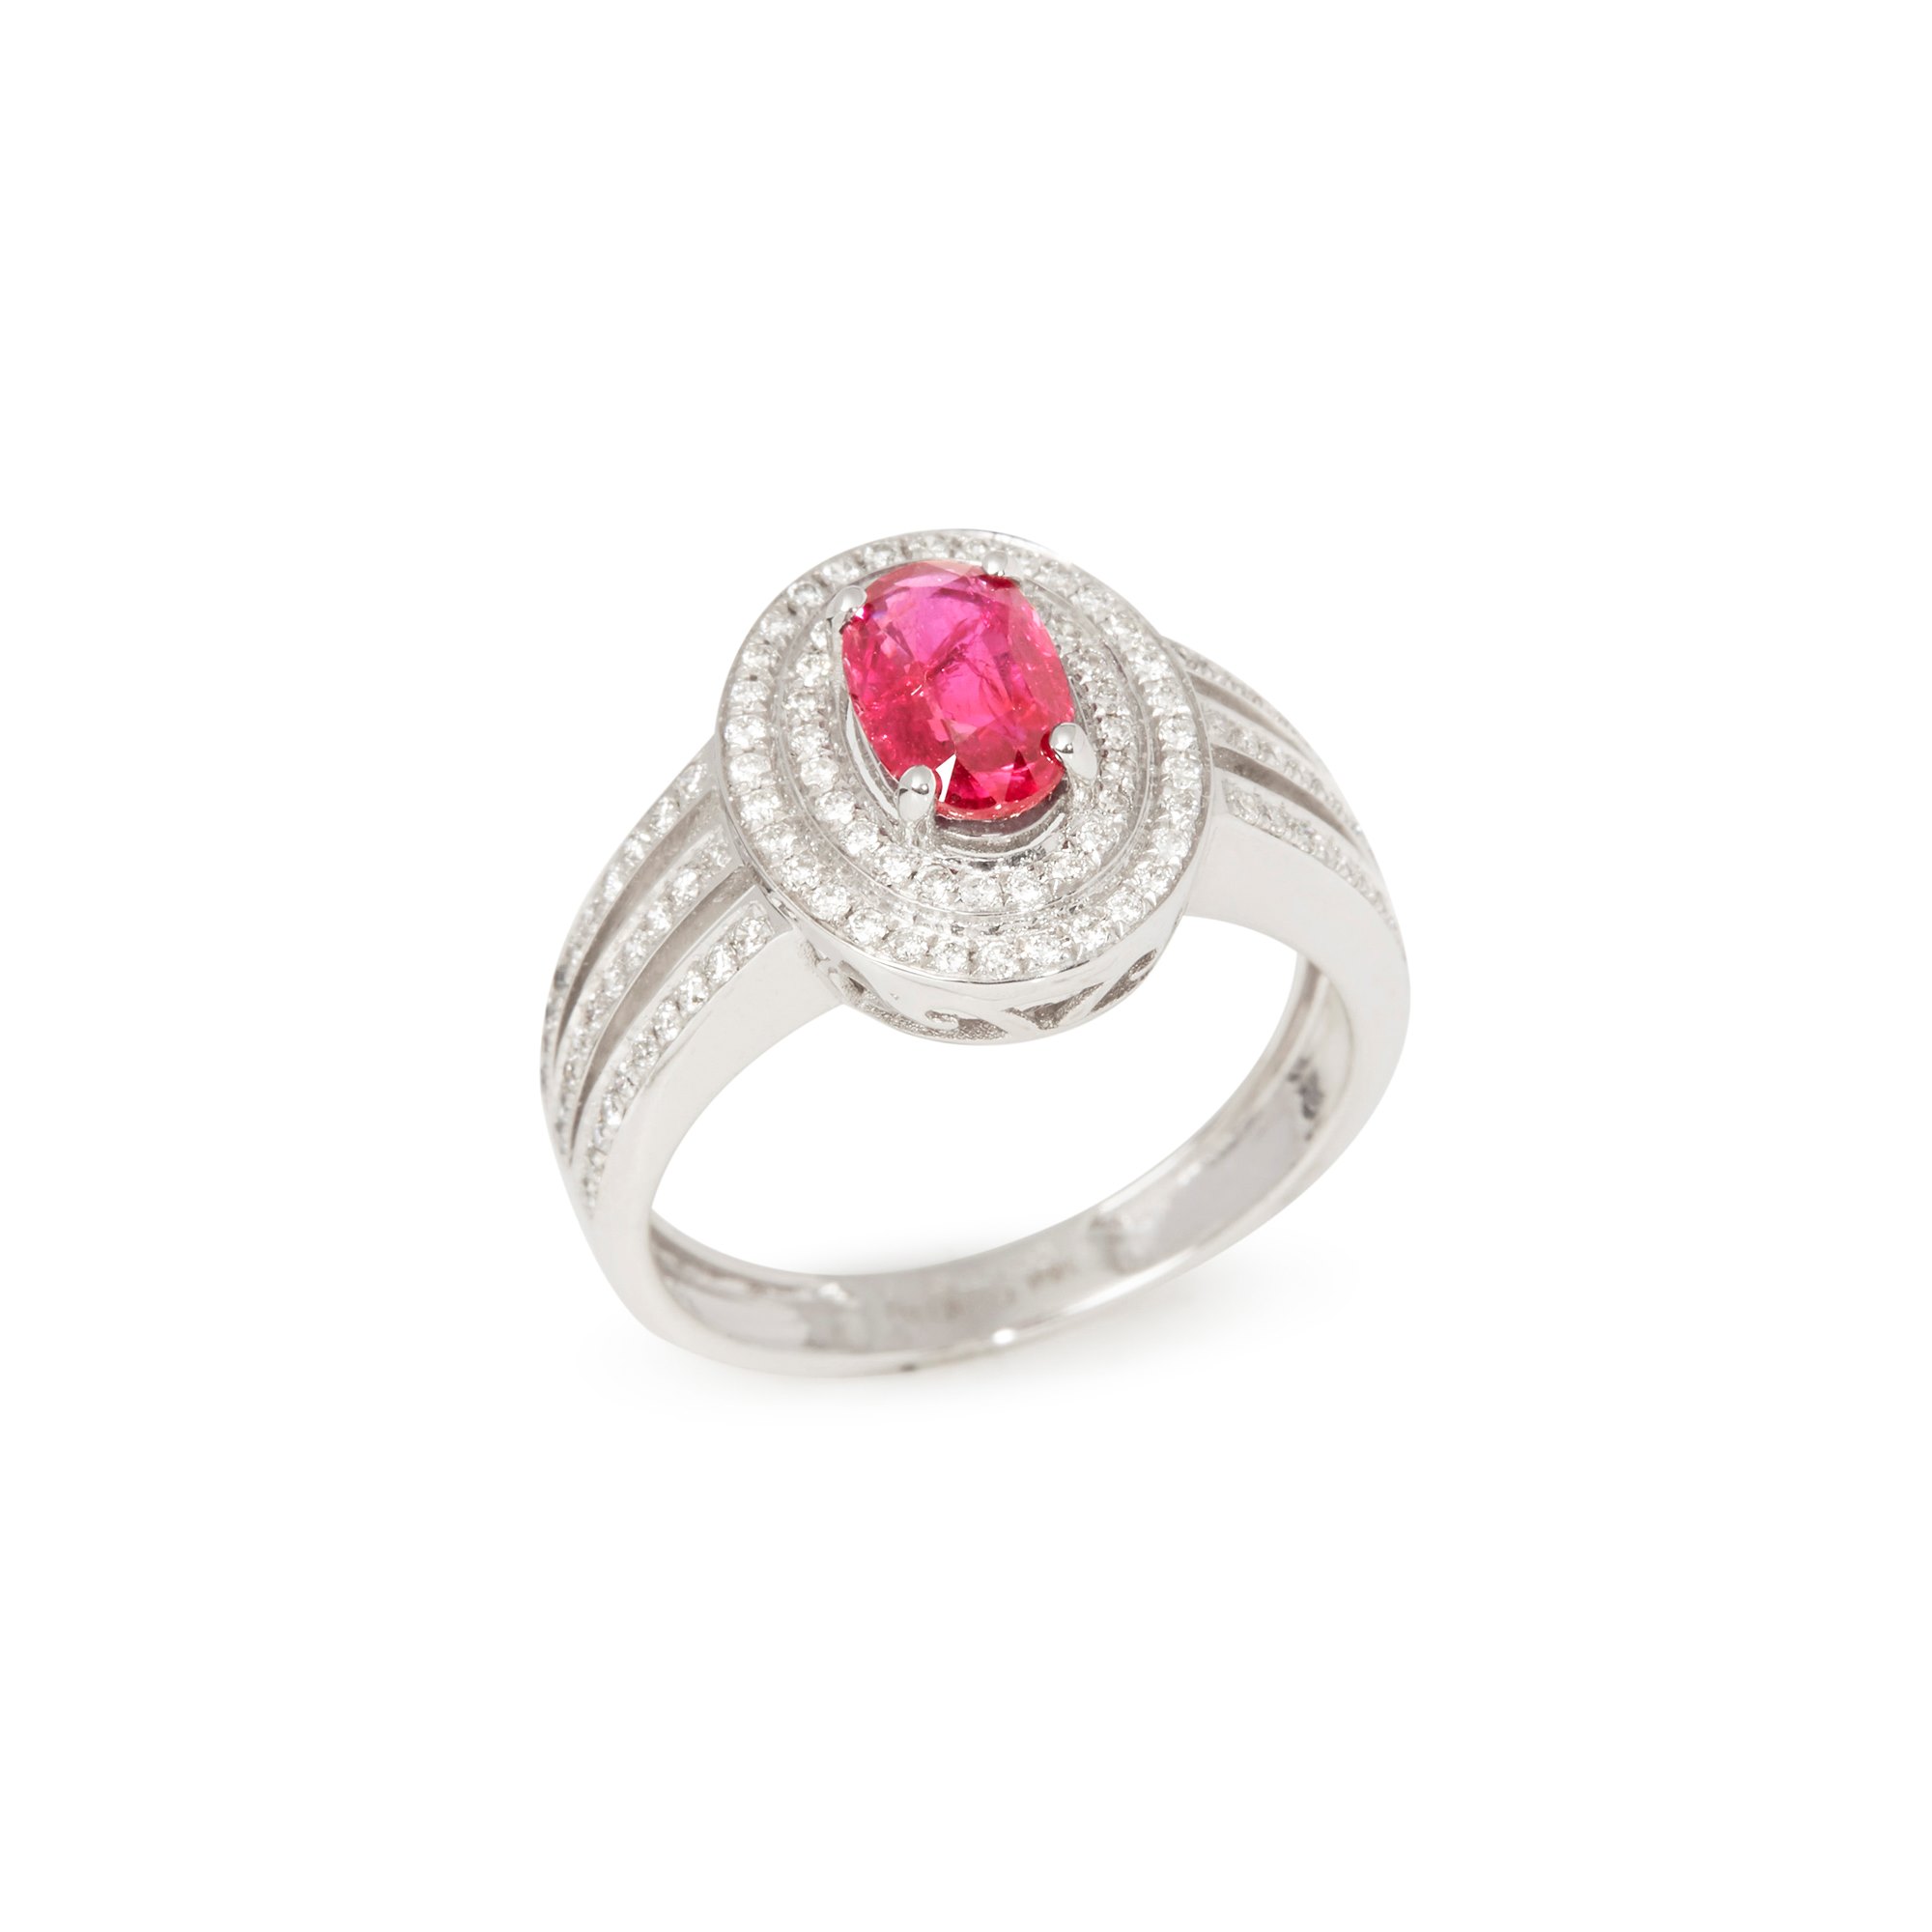 David Jerome Certified 1.09ct Untreated Burmese Oval Cut Ruby and Diamond 18ct gold Ring